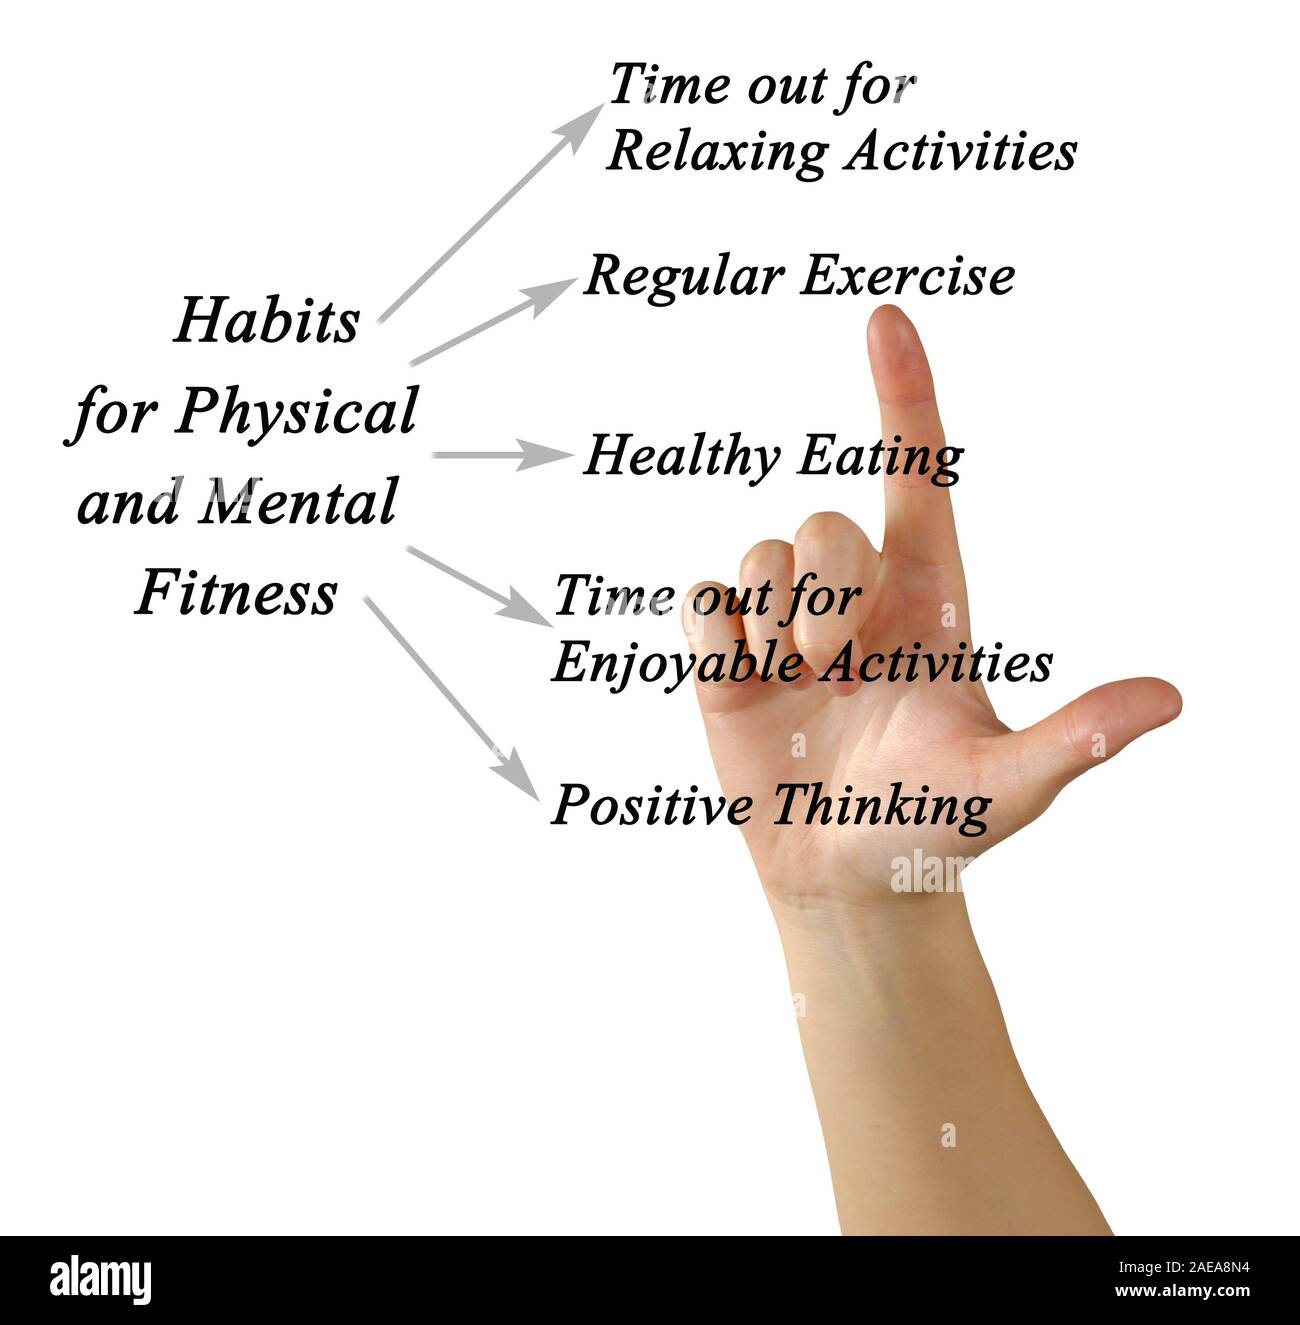 Habits for Physical and Mental Fitness Stock Photo